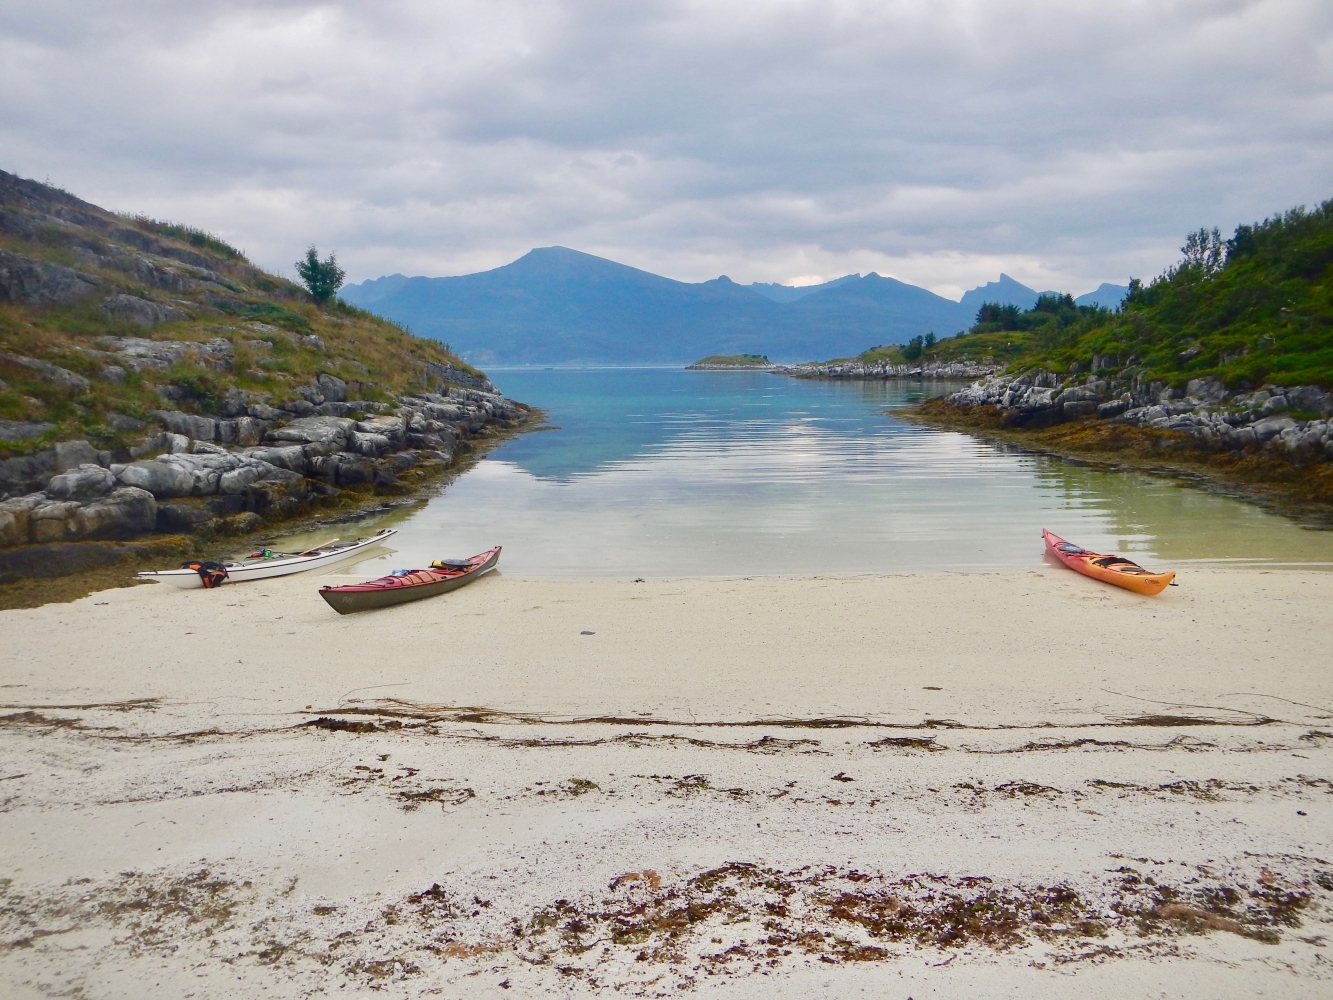 Kayaks at a sandy beach, mountains in the background